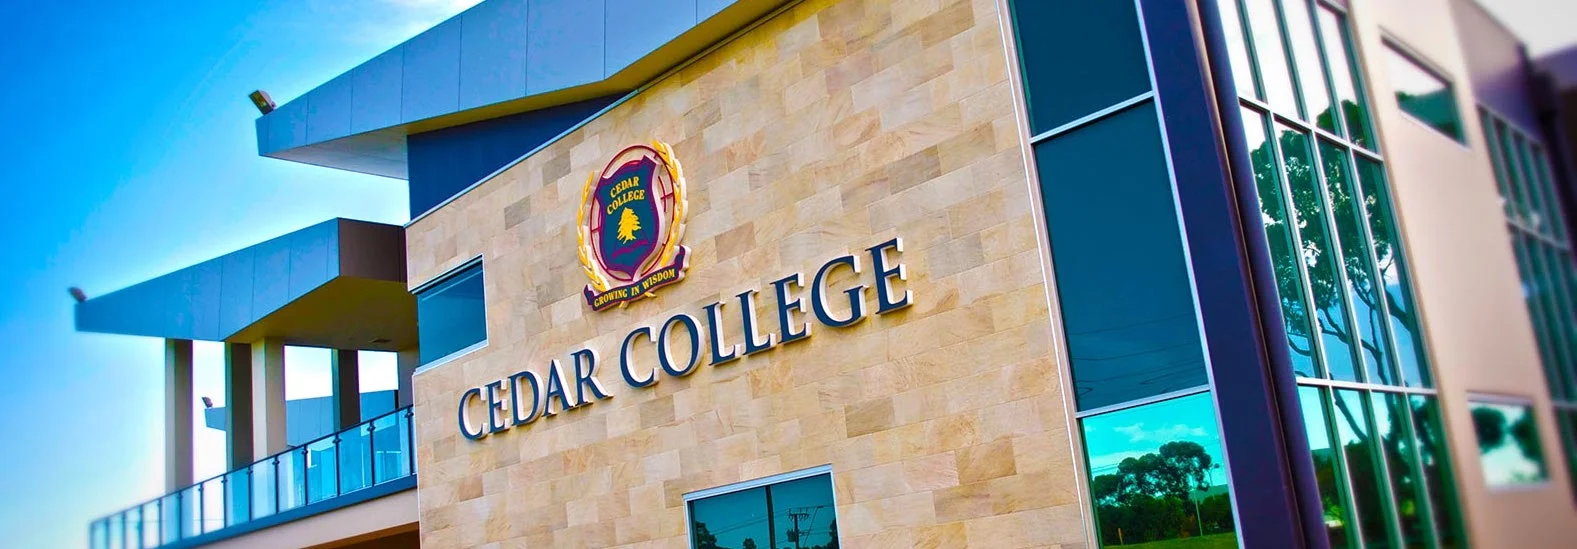 It shows cedar college and cedar school as one of the top A Level schools in Pakistan.